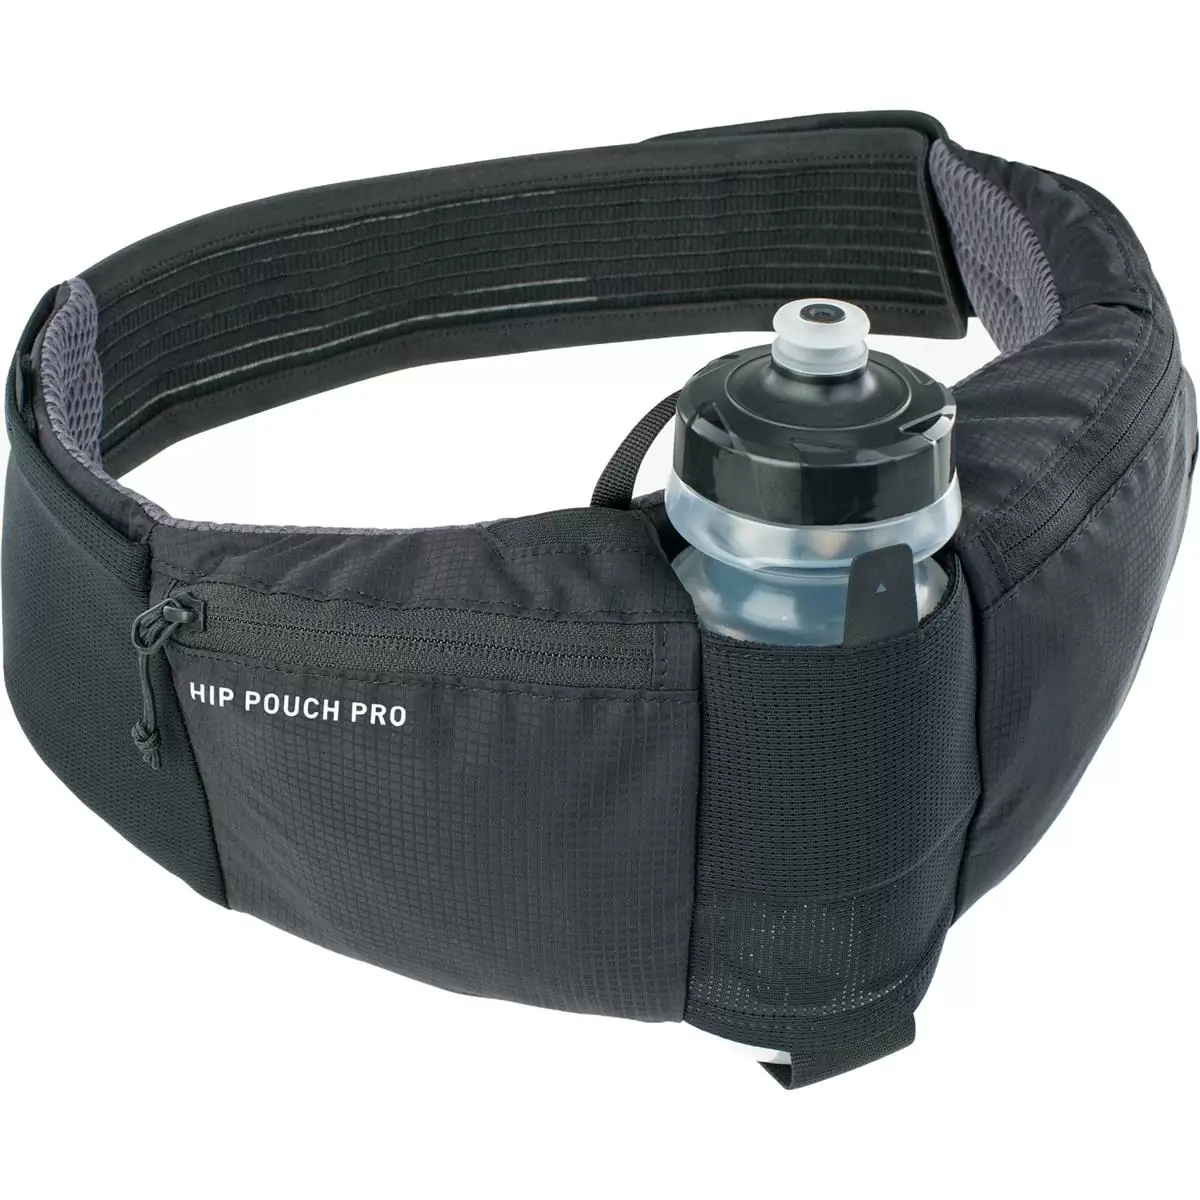 Hip Pouch Pro 1.5lt Black with water bottle 550ml - image